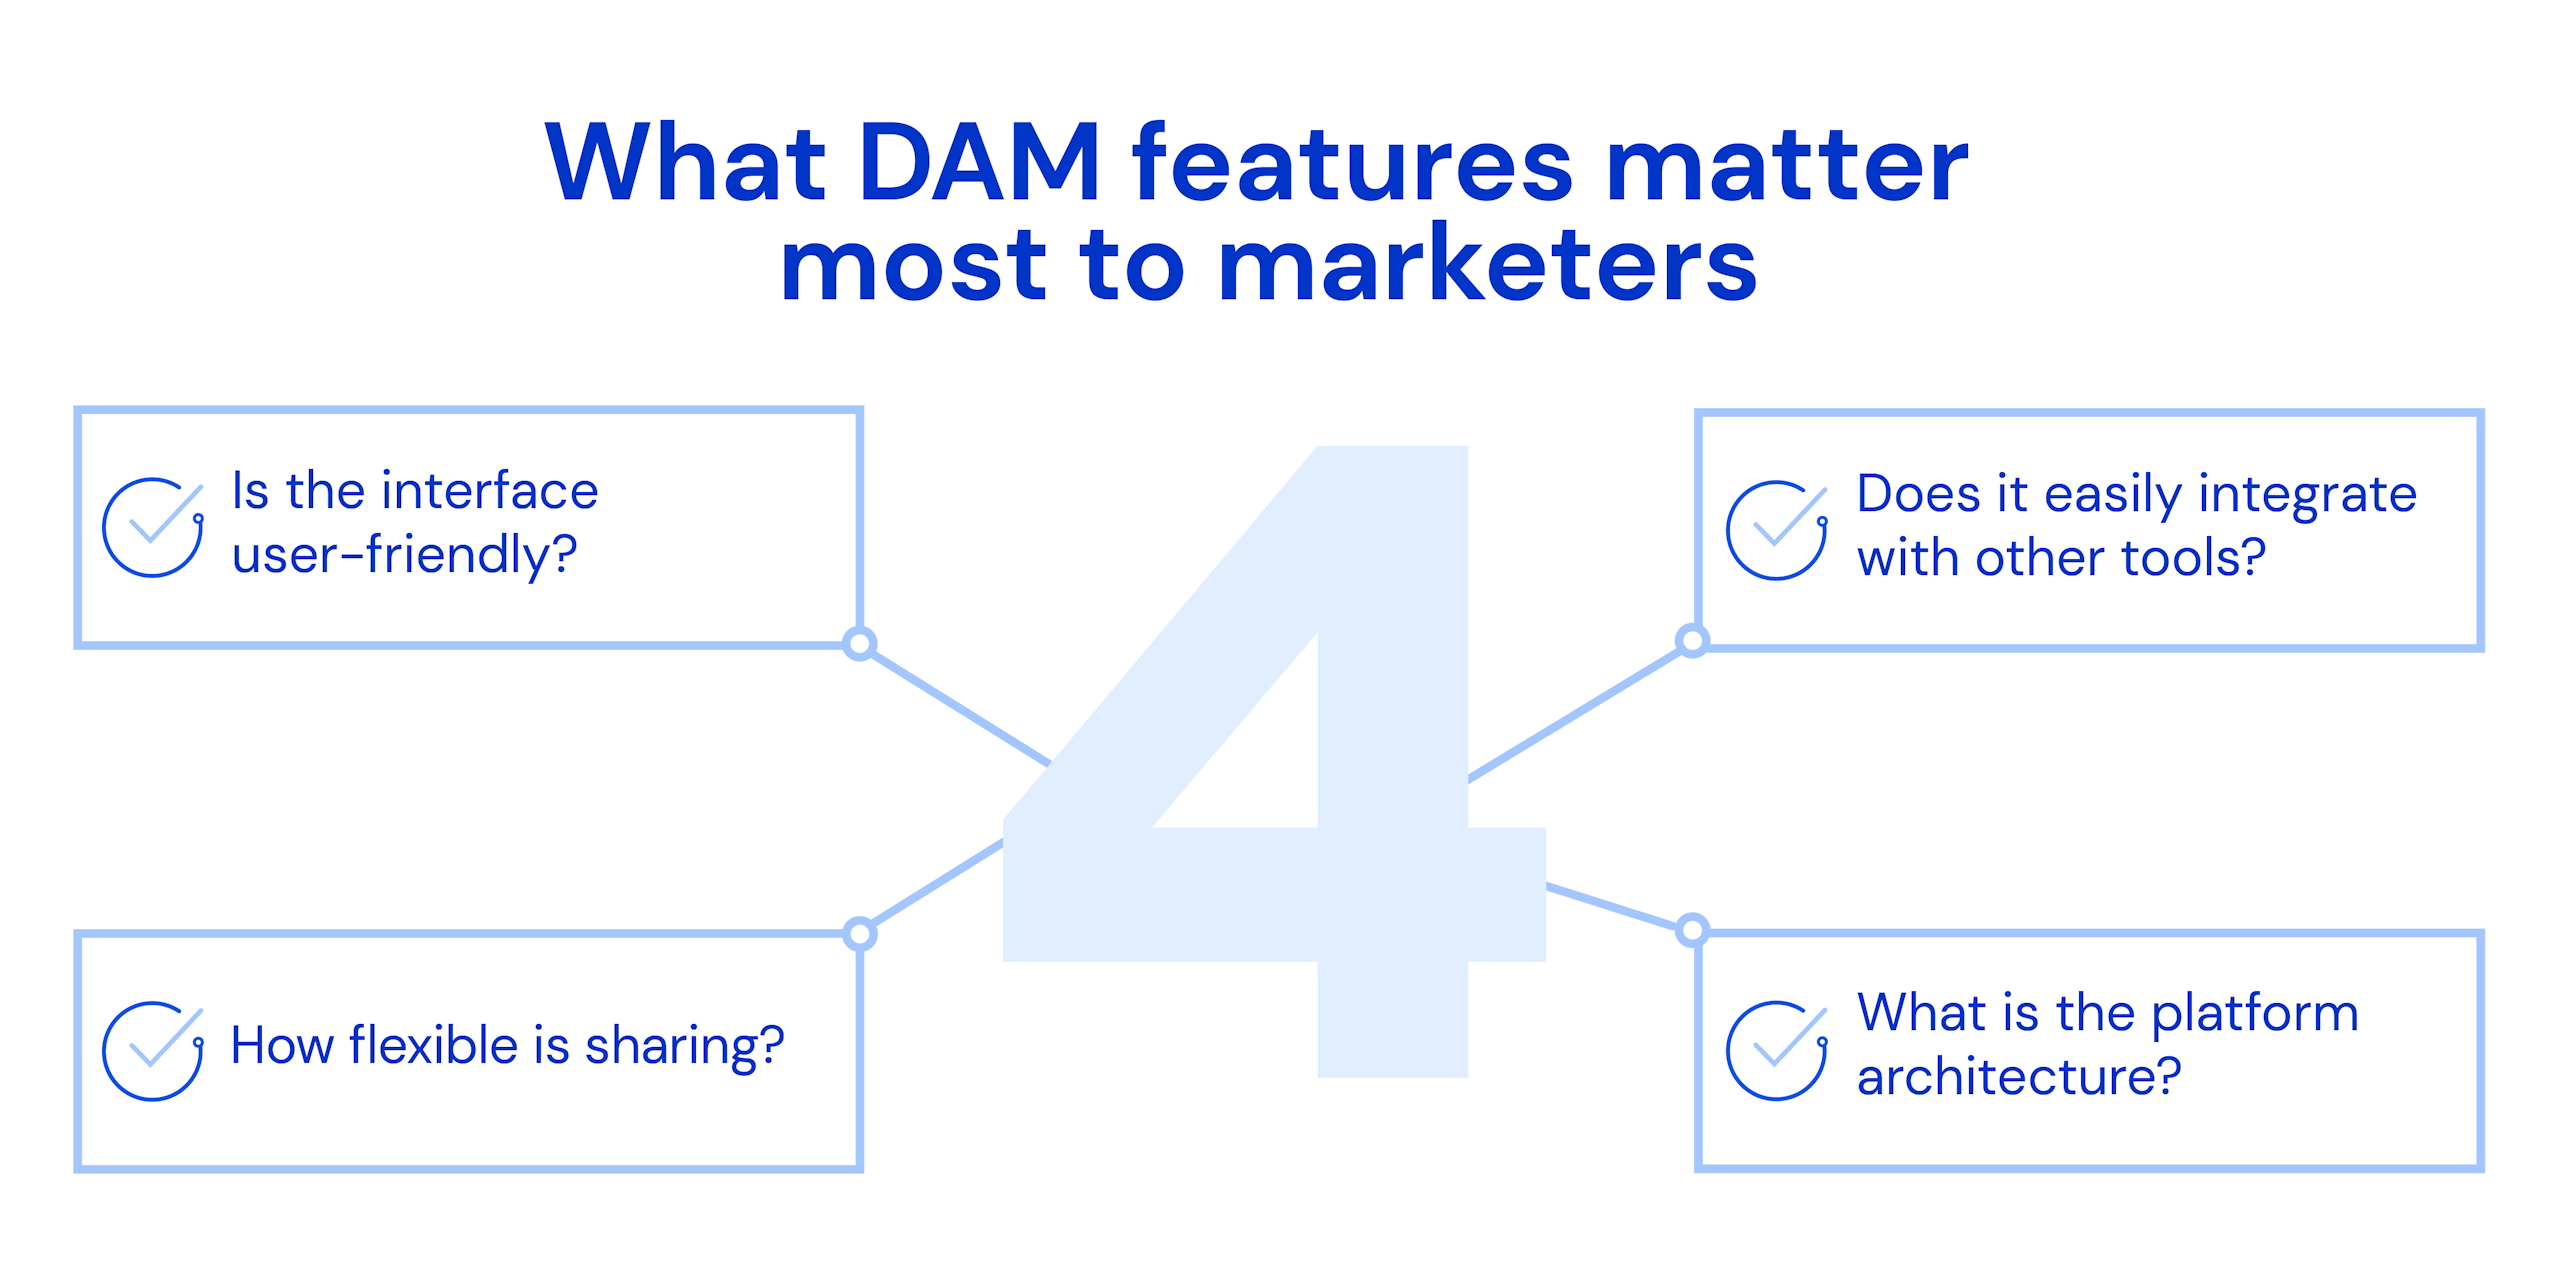 What are the key DAM features for marketers?